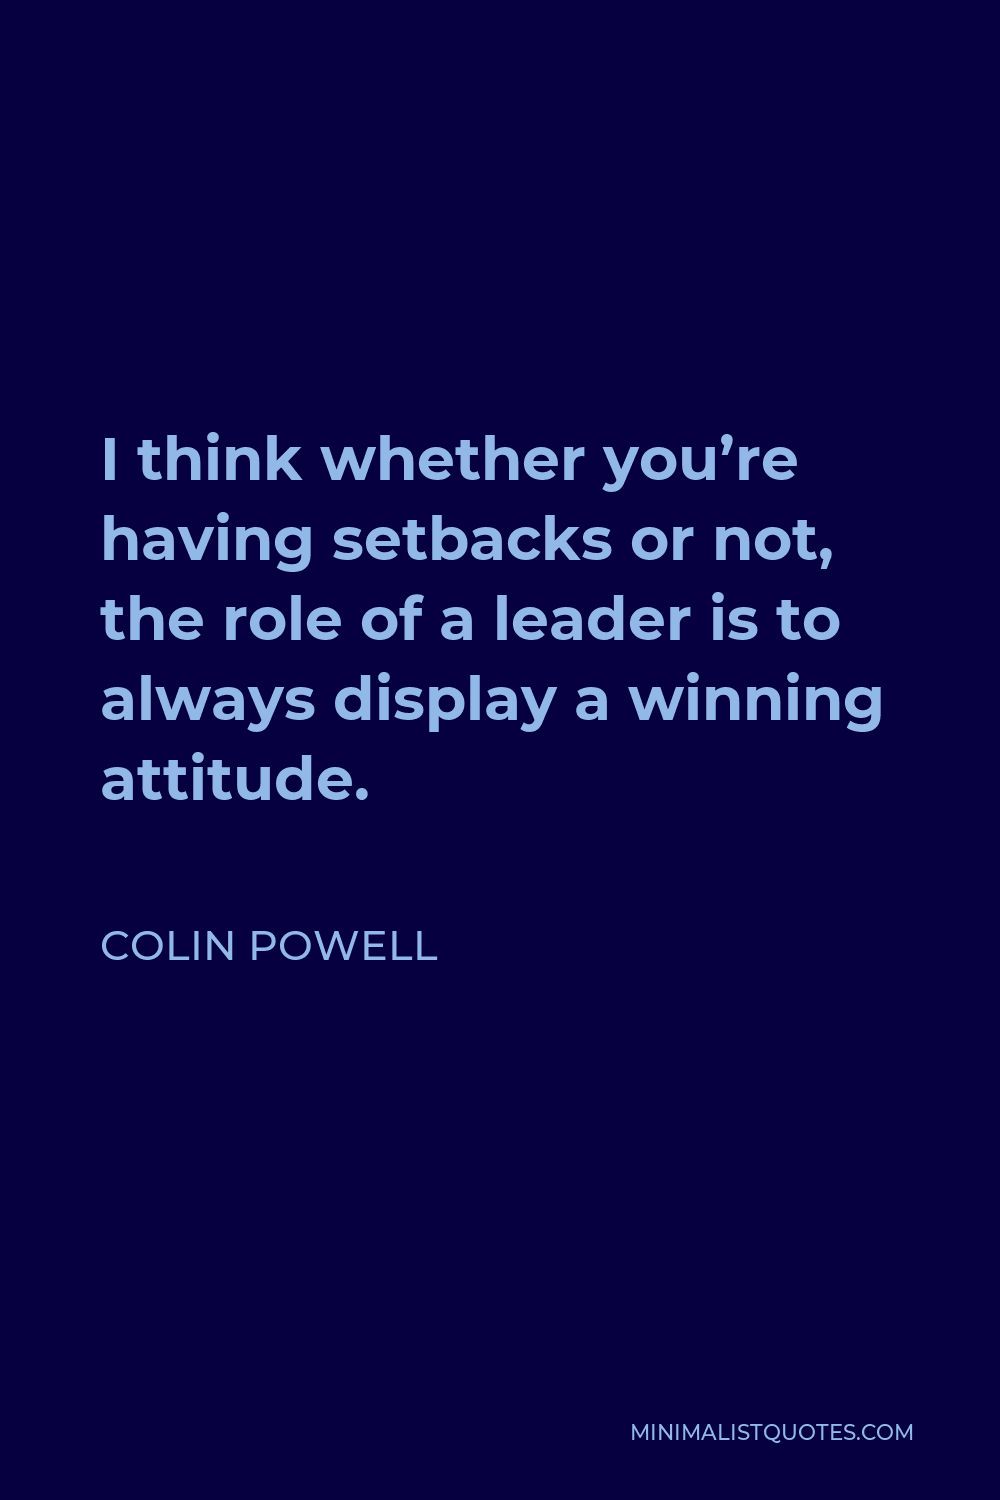 Colin Powell Quote - I think whether you’re having setbacks or not, the role of a leader is to always display a winning attitude.